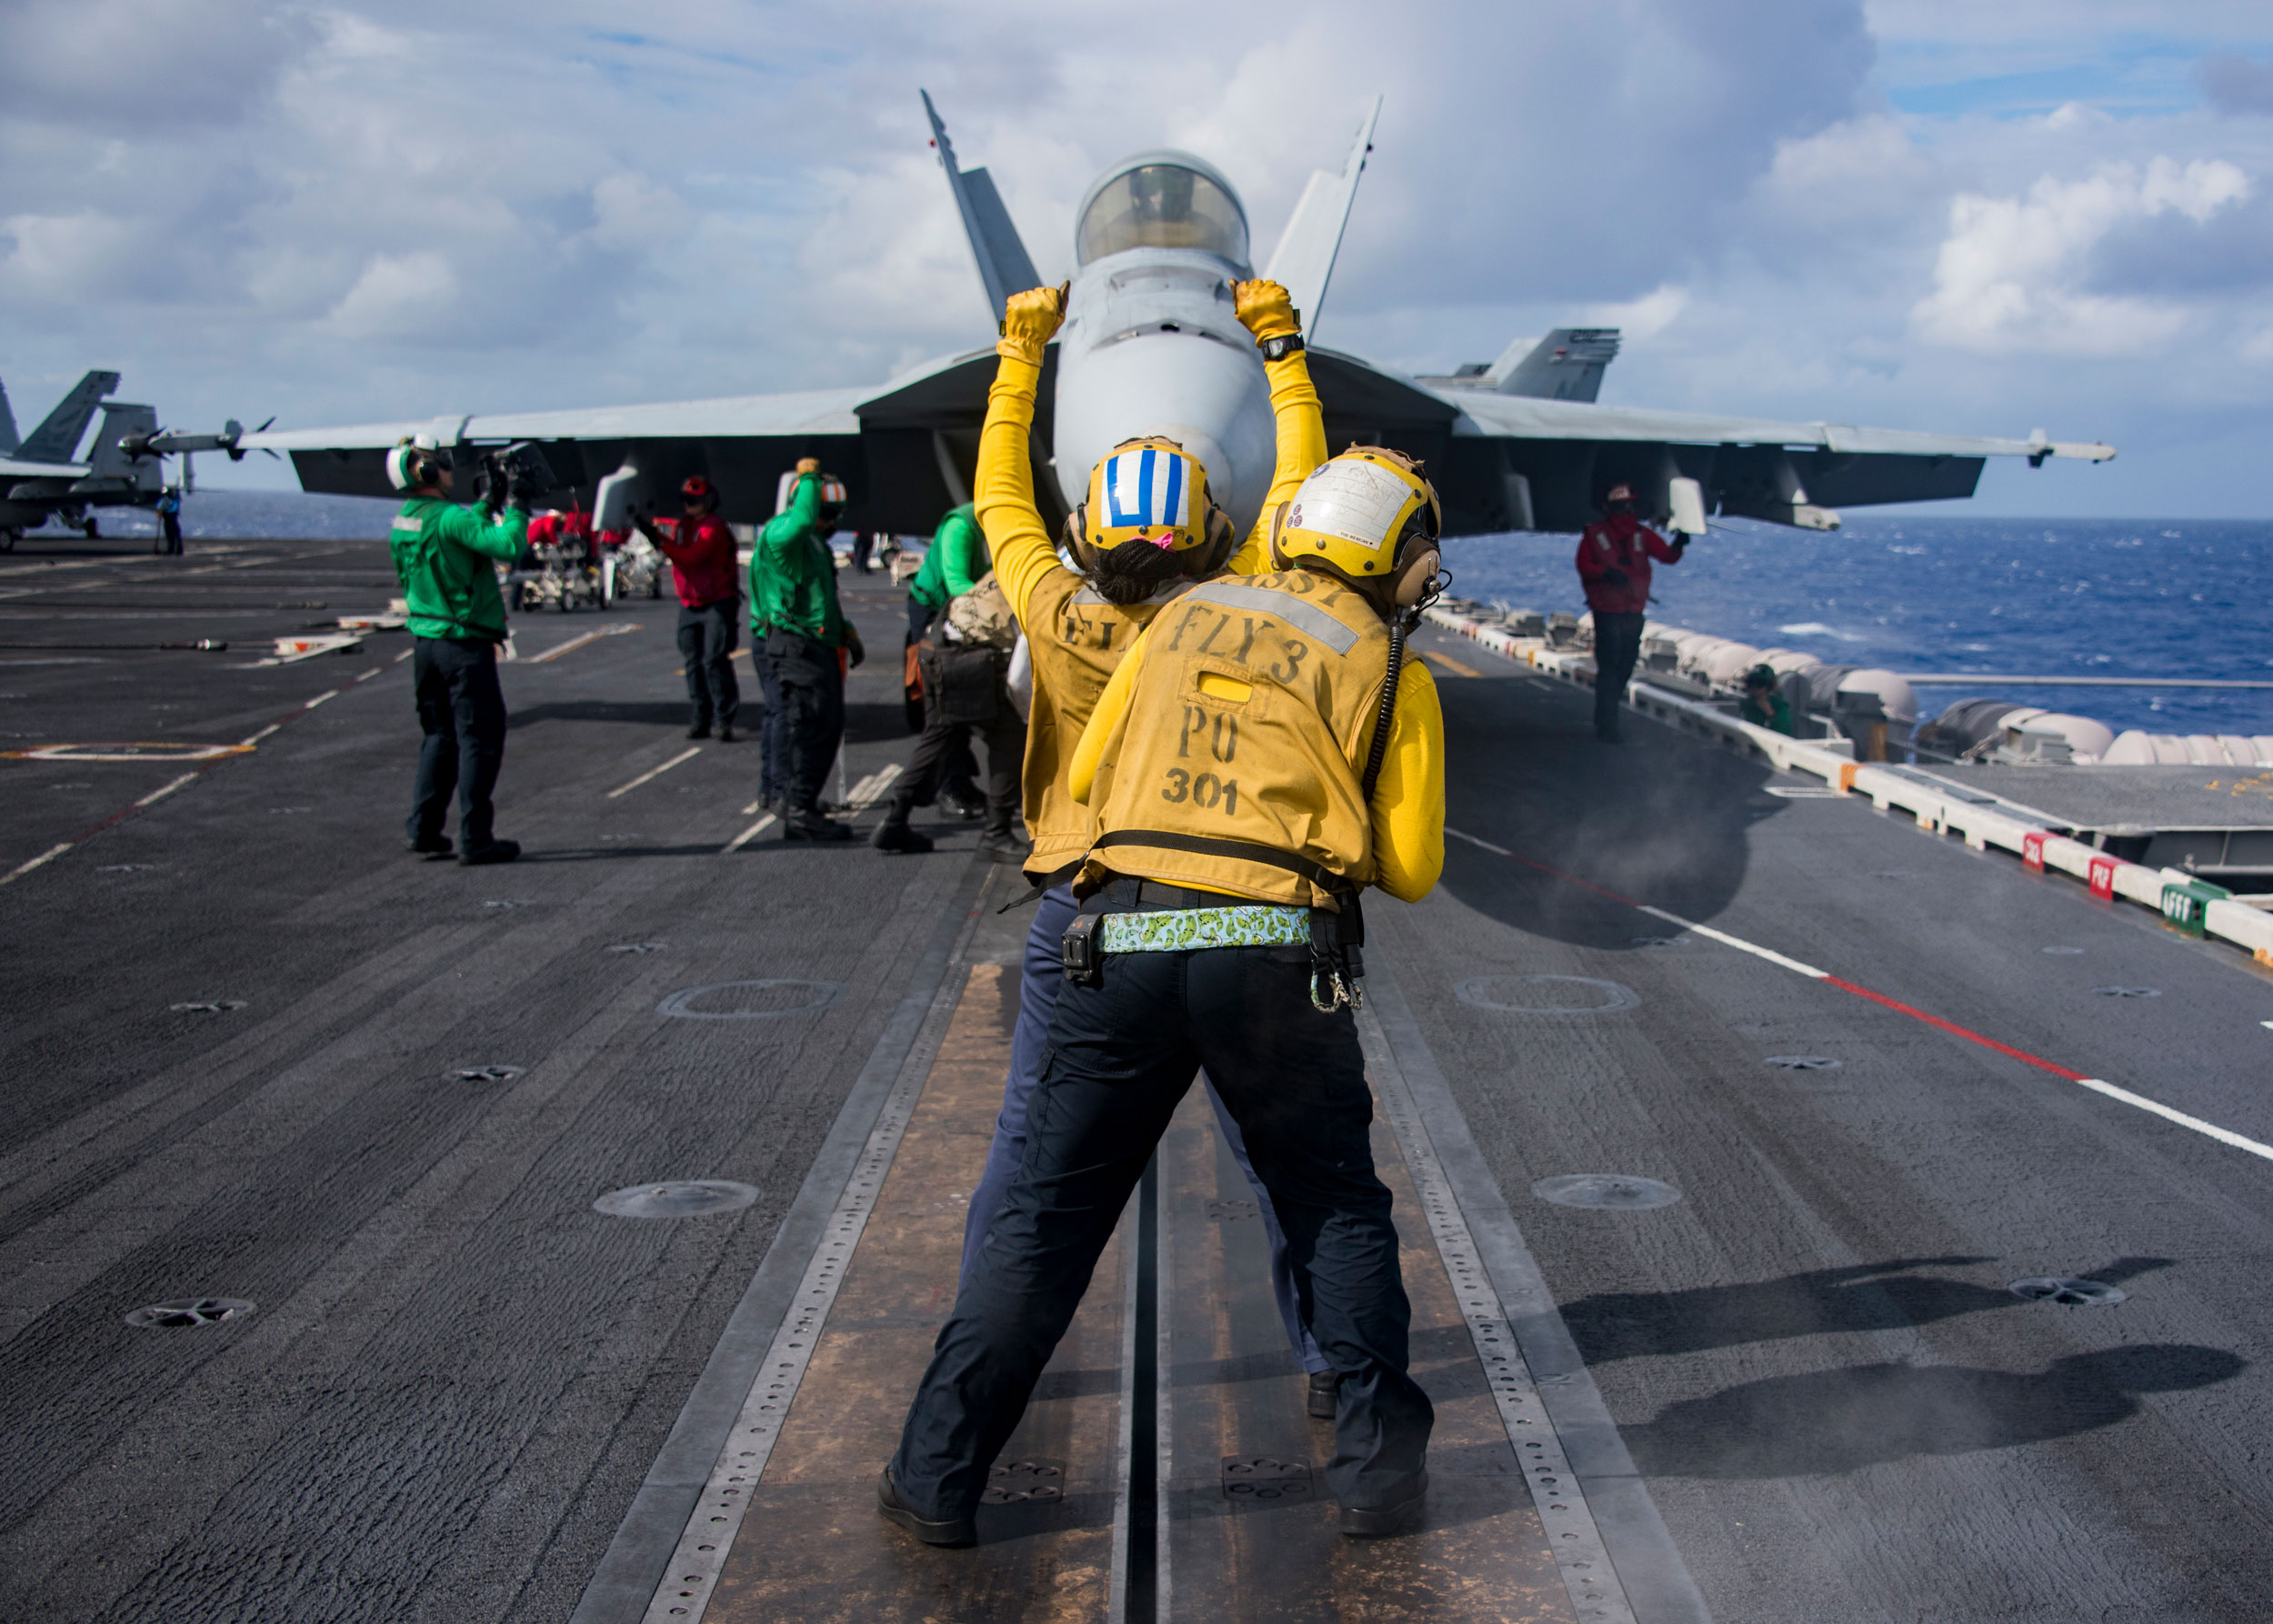 An F/A-18 Hornet prepares for takeoff on a U.S. carrier. (Photo: Petty Officer 3rd Class Sean Castellano)